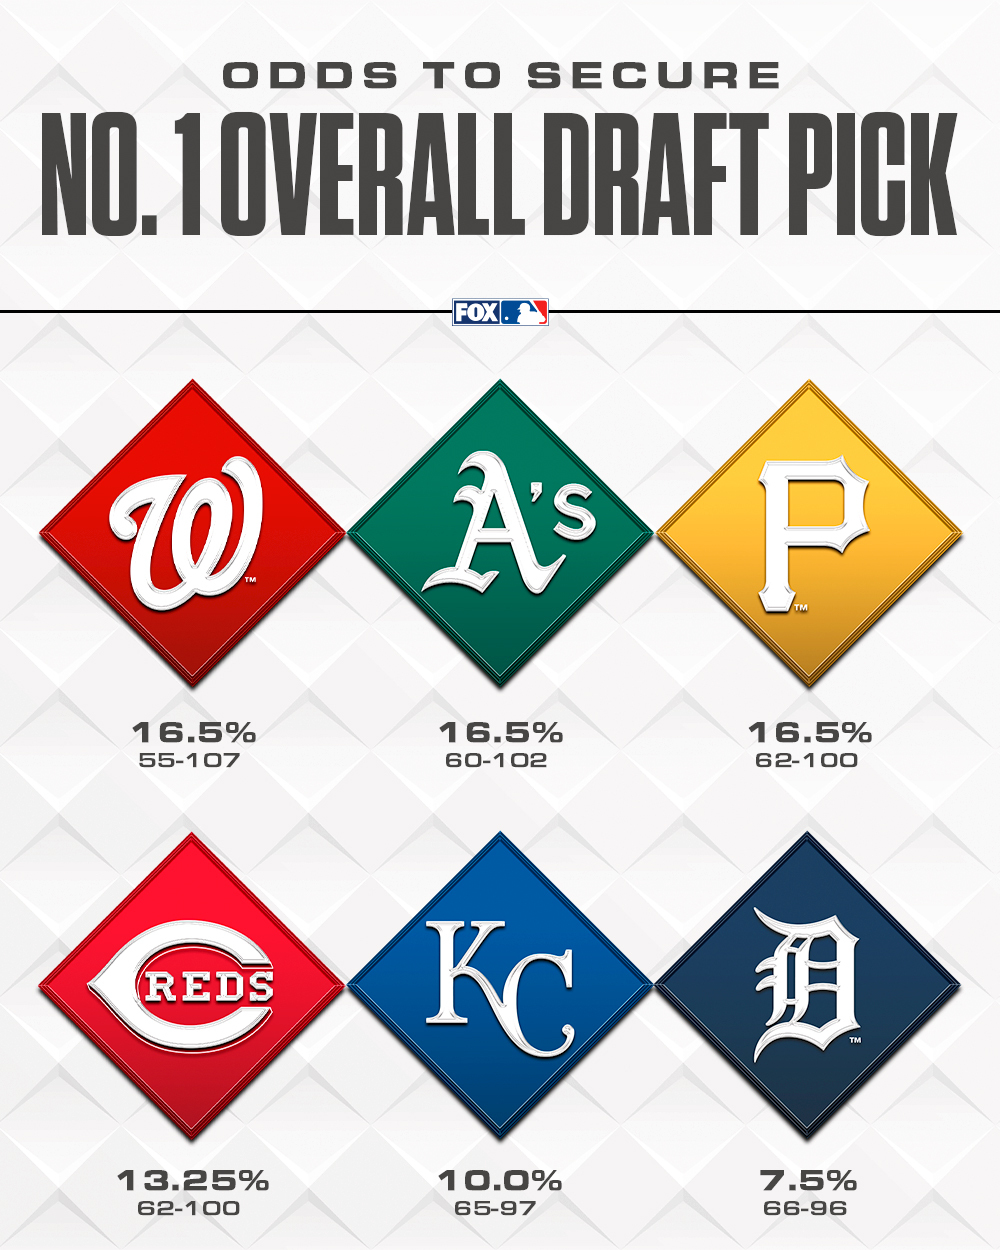 FOX Sports MLB on Twitter "With the new MLB Draft lottery, here are